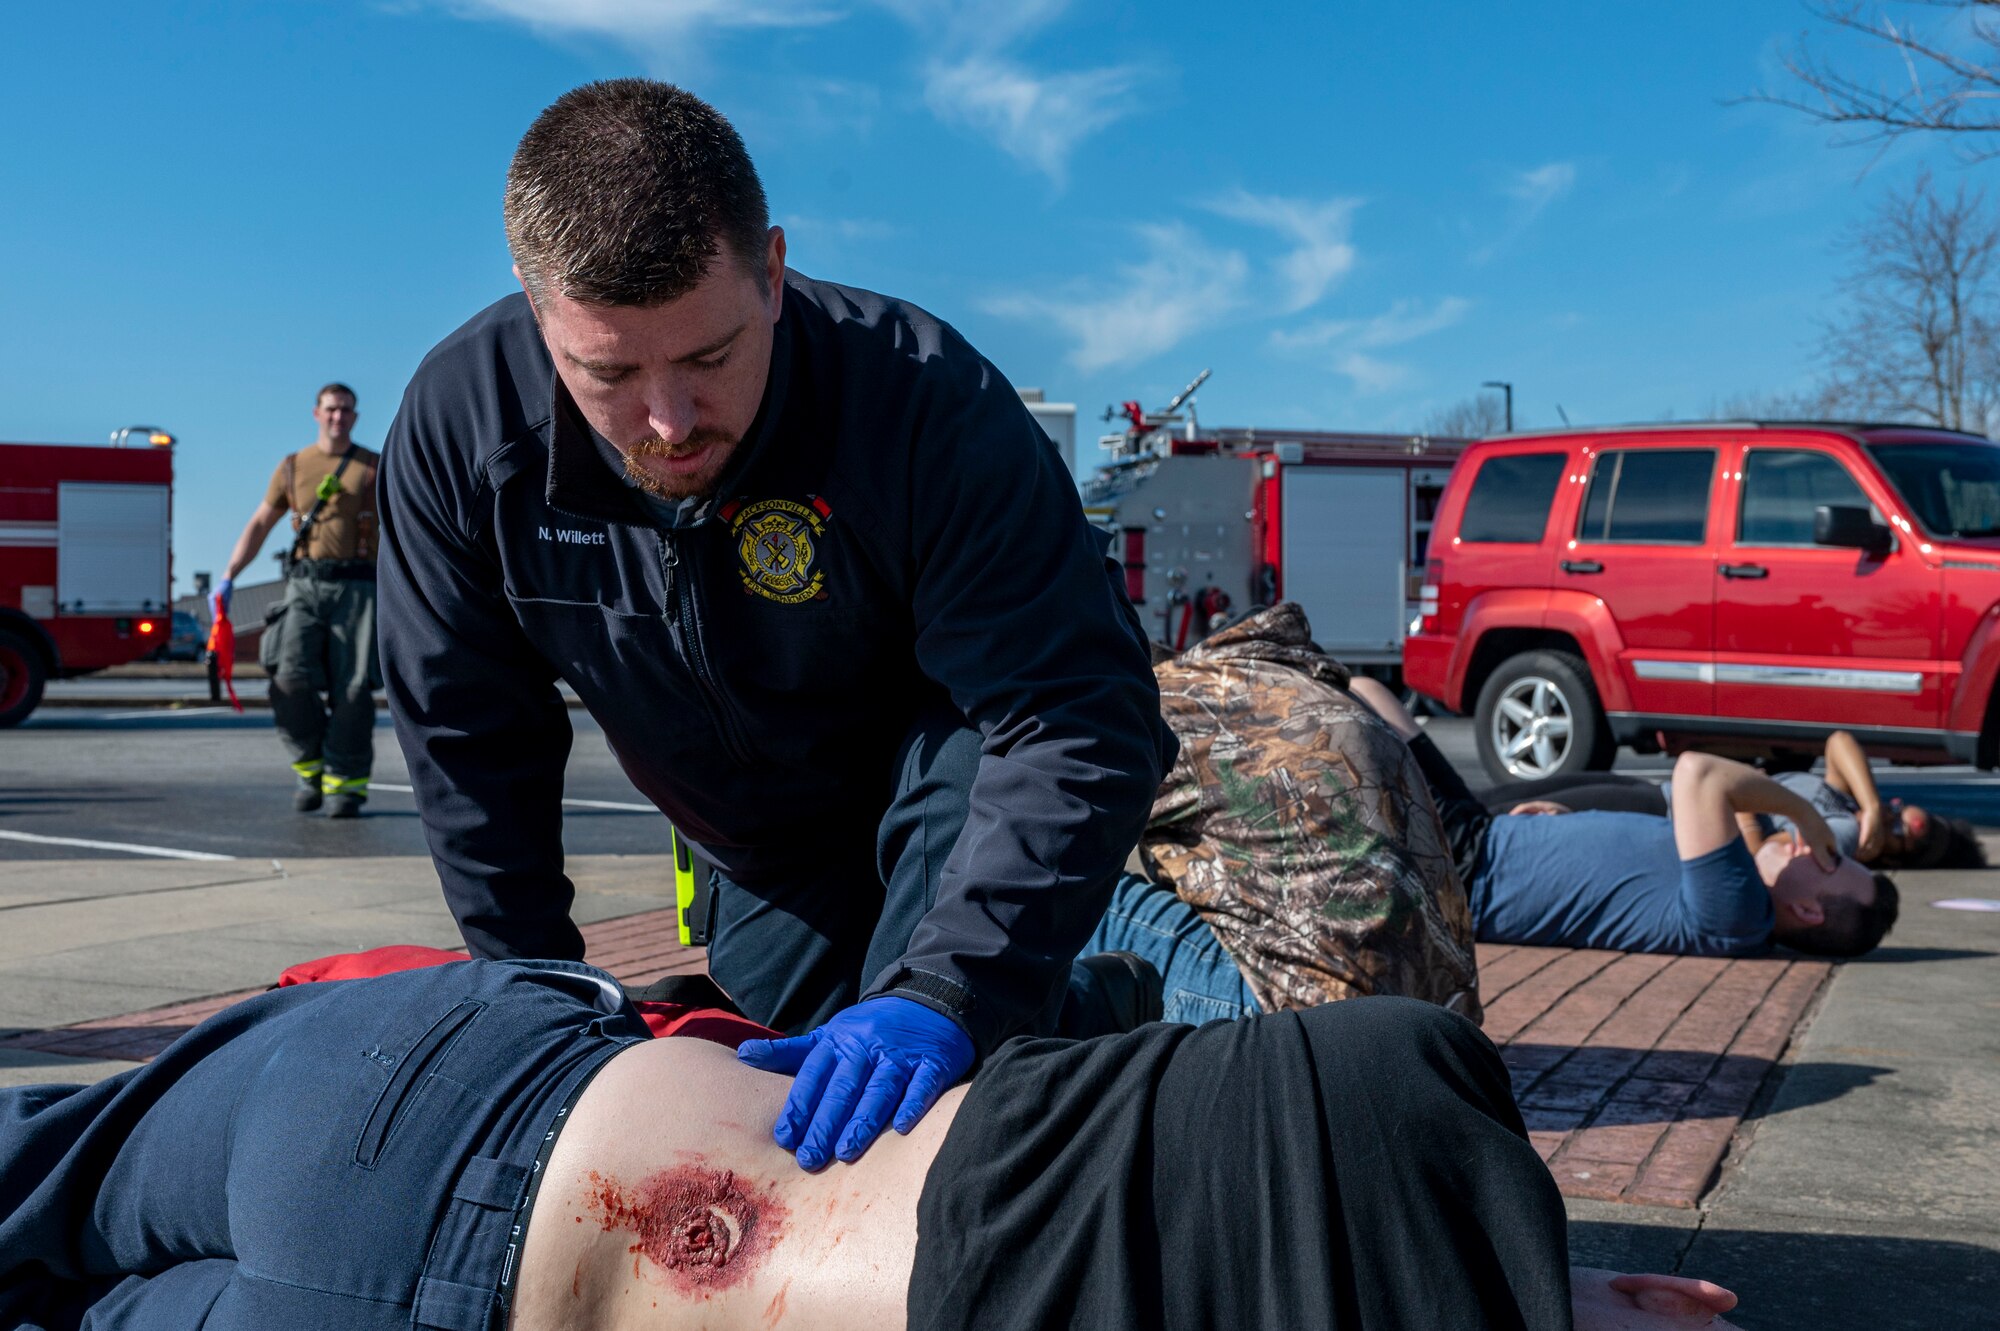 A first responder with the Jacksonville Fire Department assess a patient’s injury